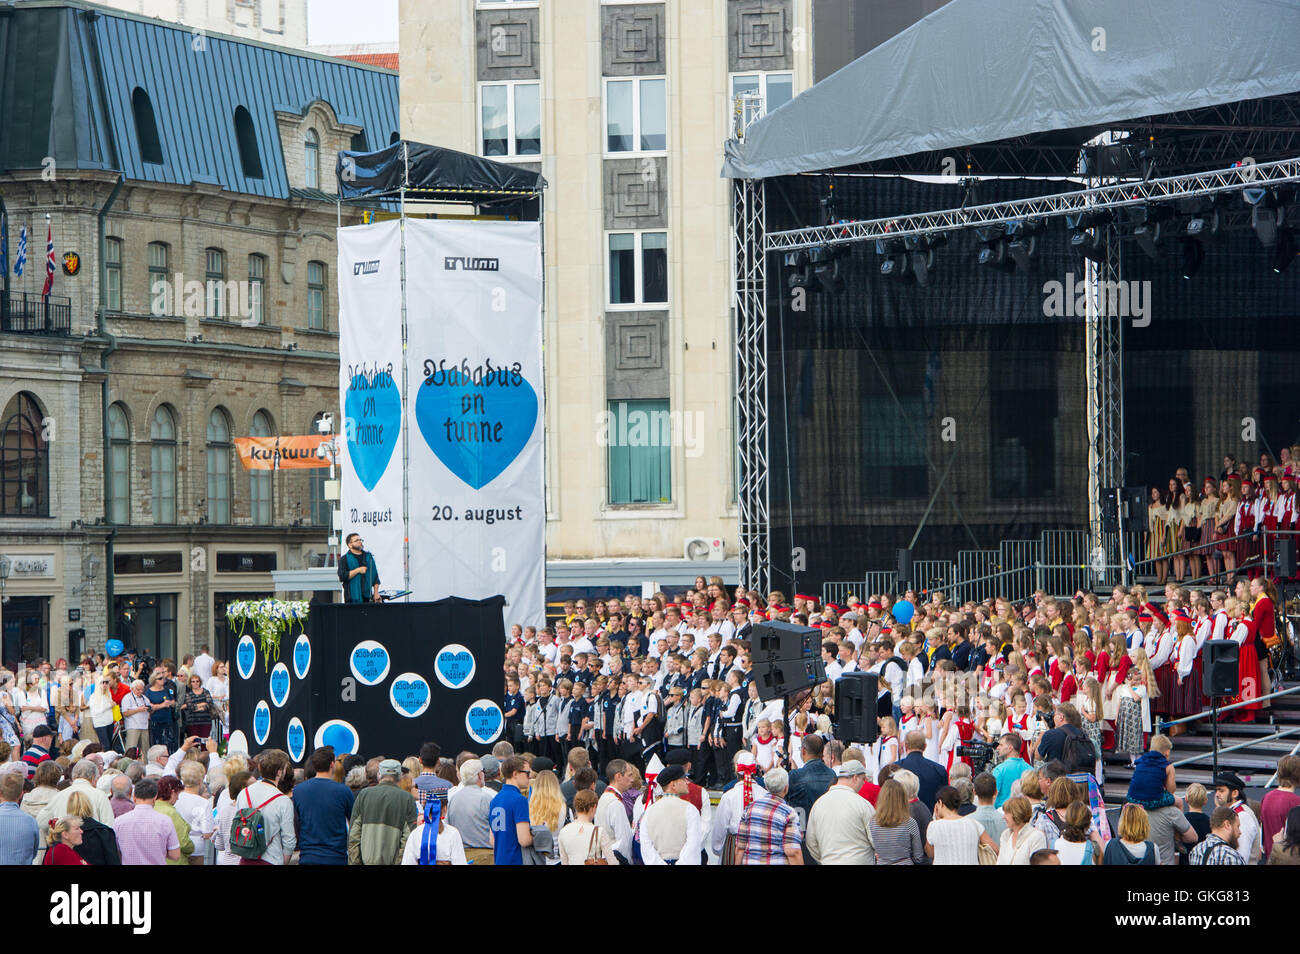 Tallinn, Estonia, 20th August 2016. Folkloric choral groups sing at the Freedom square of Tallinn. On 20th of August the Republic of Estonia celebrates the 25th years since the restoration of Independence after the collapse of the Soviet Union in 1991. Credit:  Nicolas Bouvy/Alamy Live News Stock Photo